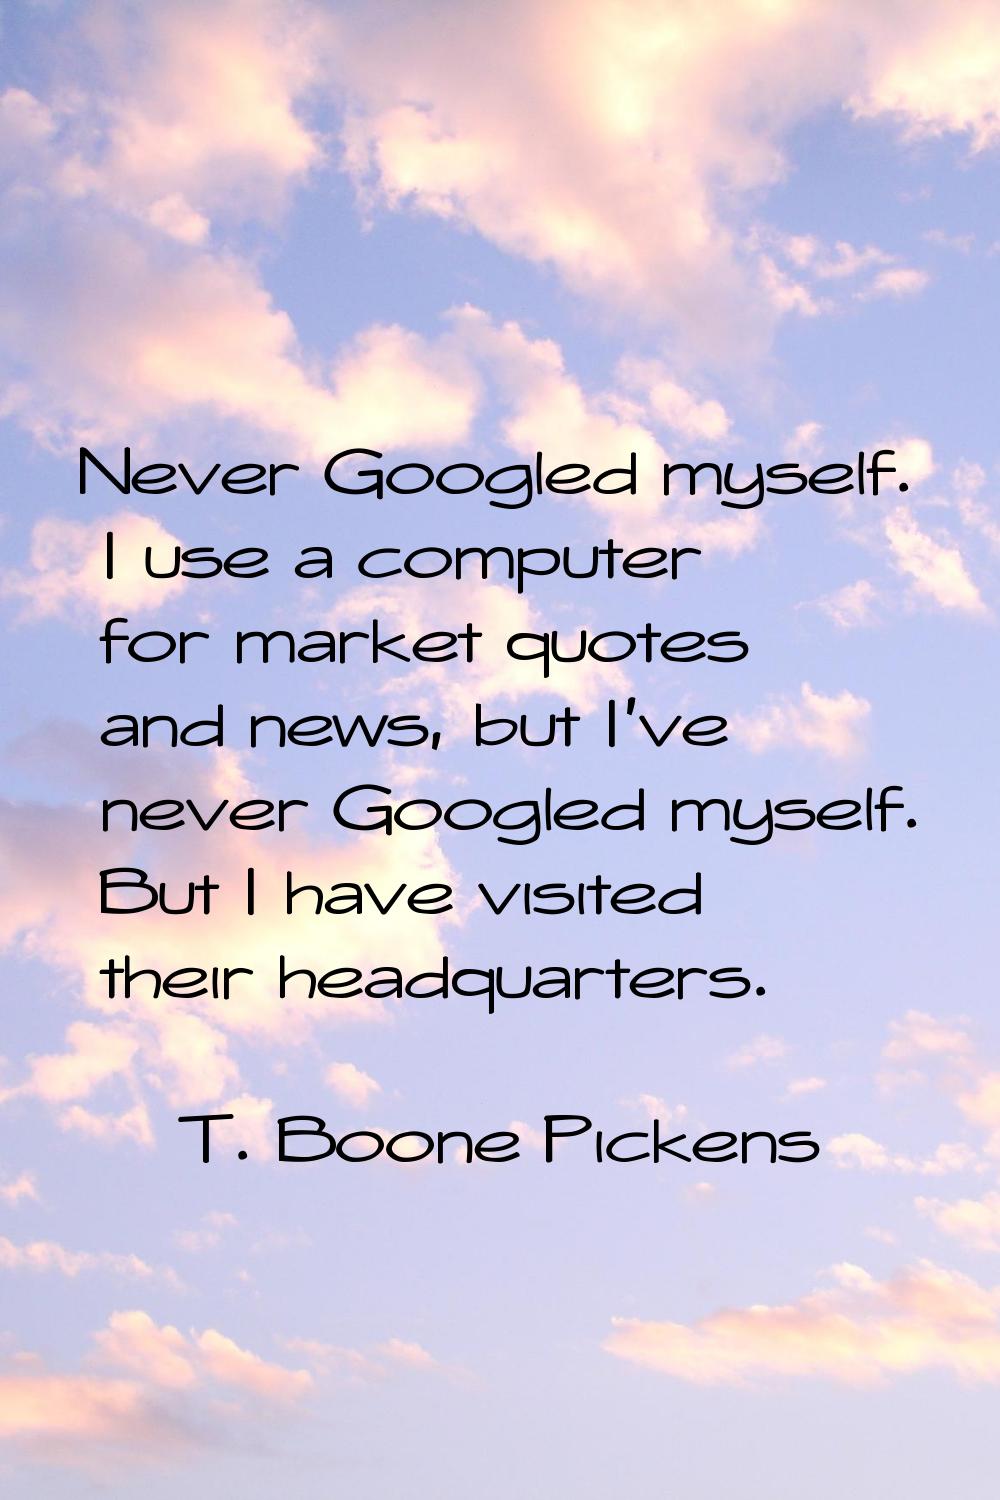 Never Googled myself. I use a computer for market quotes and news, but I've never Googled myself. B